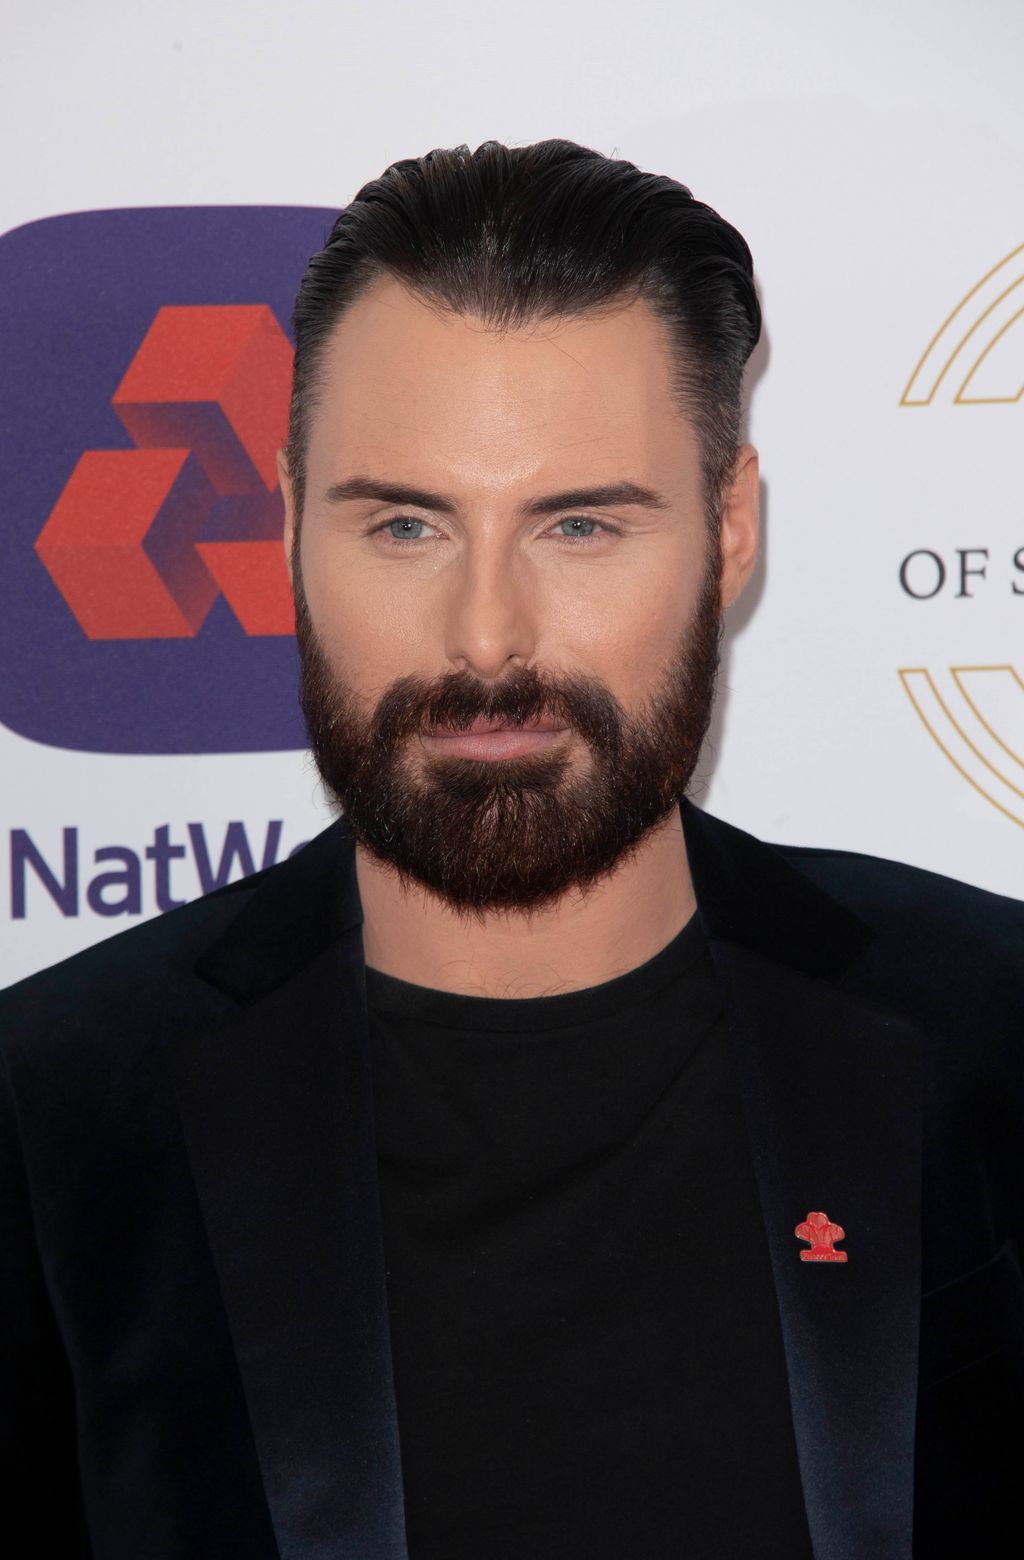 Rylan Clark on red carpet at Prince's Trust event